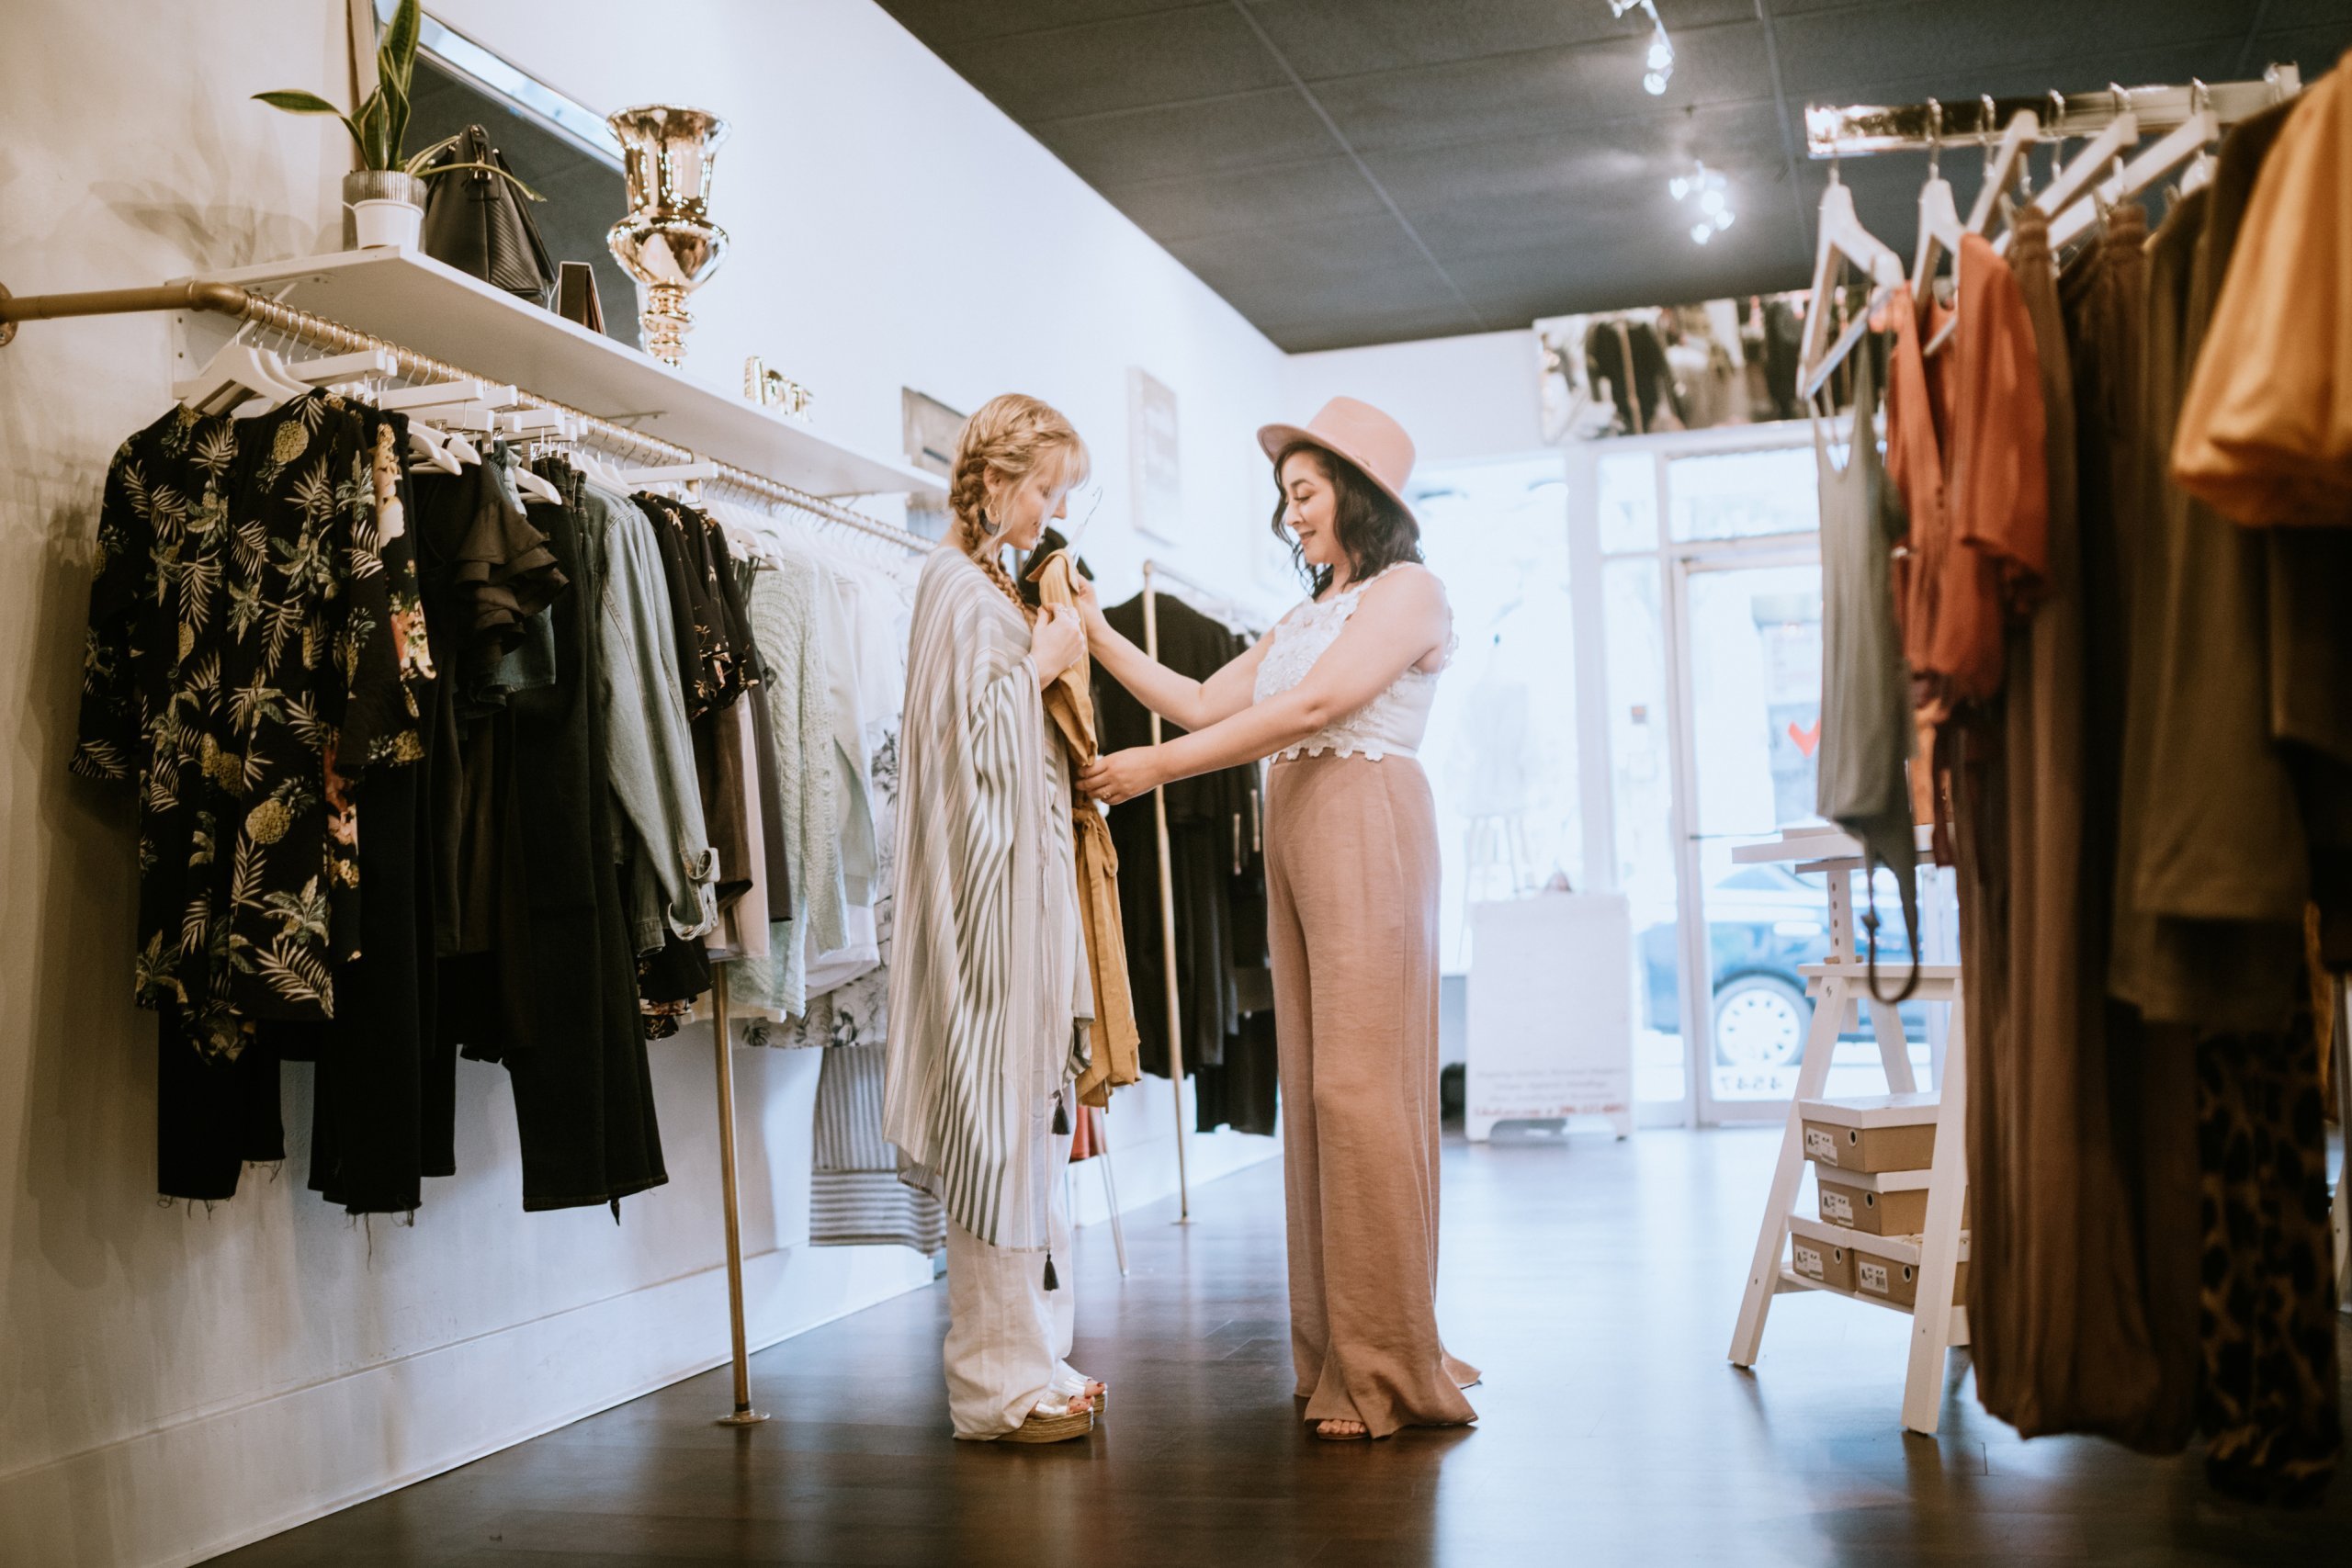 How To Start A Clothing Boutique: 11 Steps For Launching Online Or